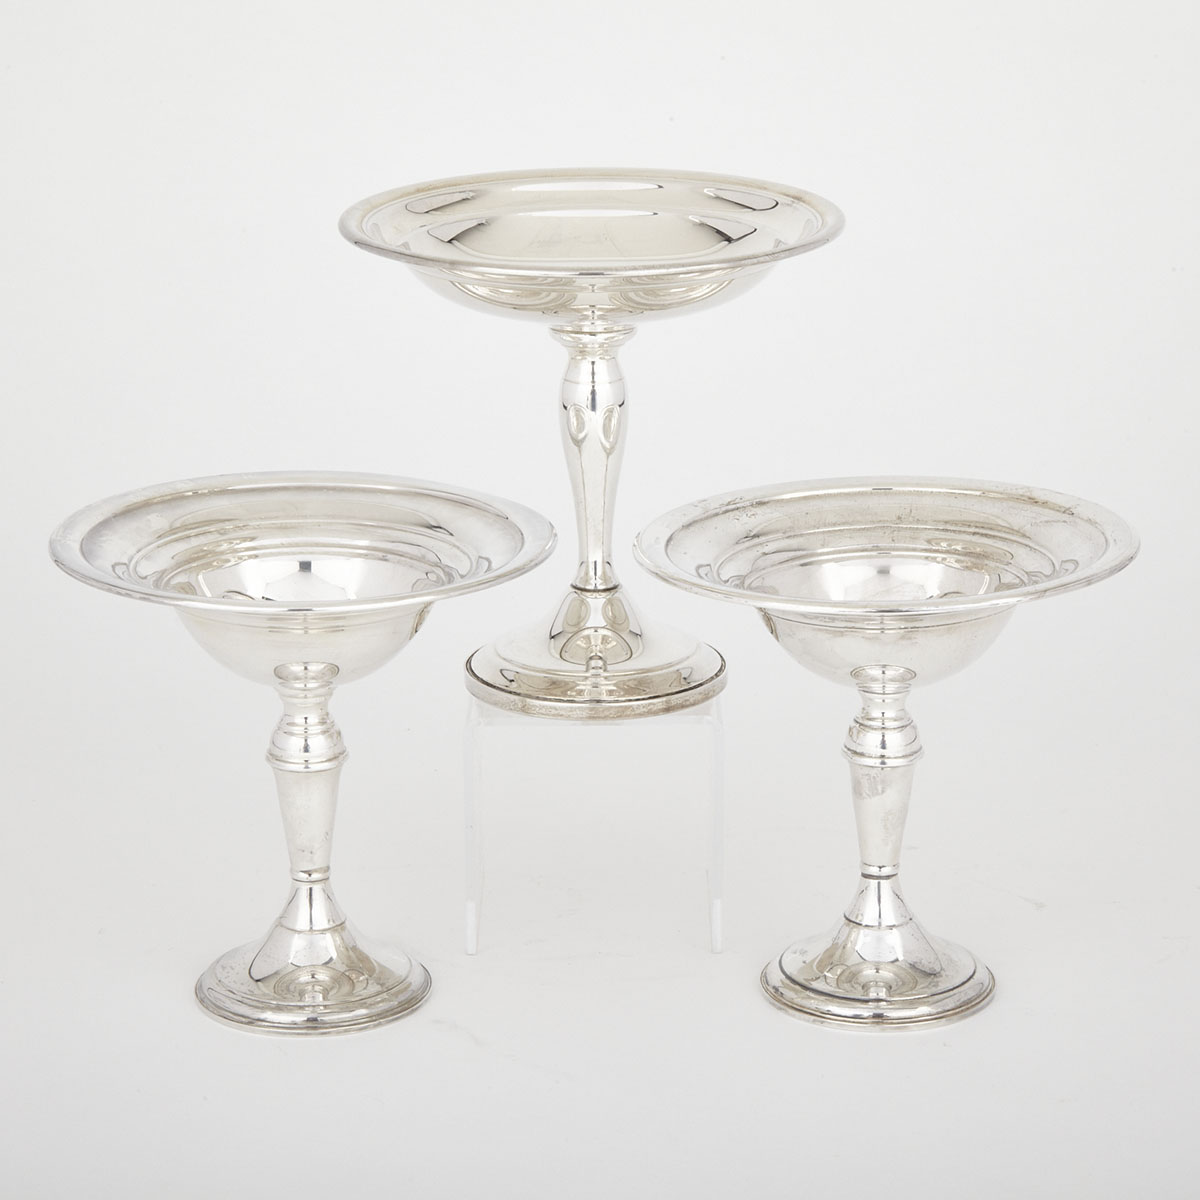 Pair of American Silver Pedestal-Footed Comports, International Silver Co., Meriden, Ct. and Another, Gorham Mfg. Co., Providence, R.I., 20th century